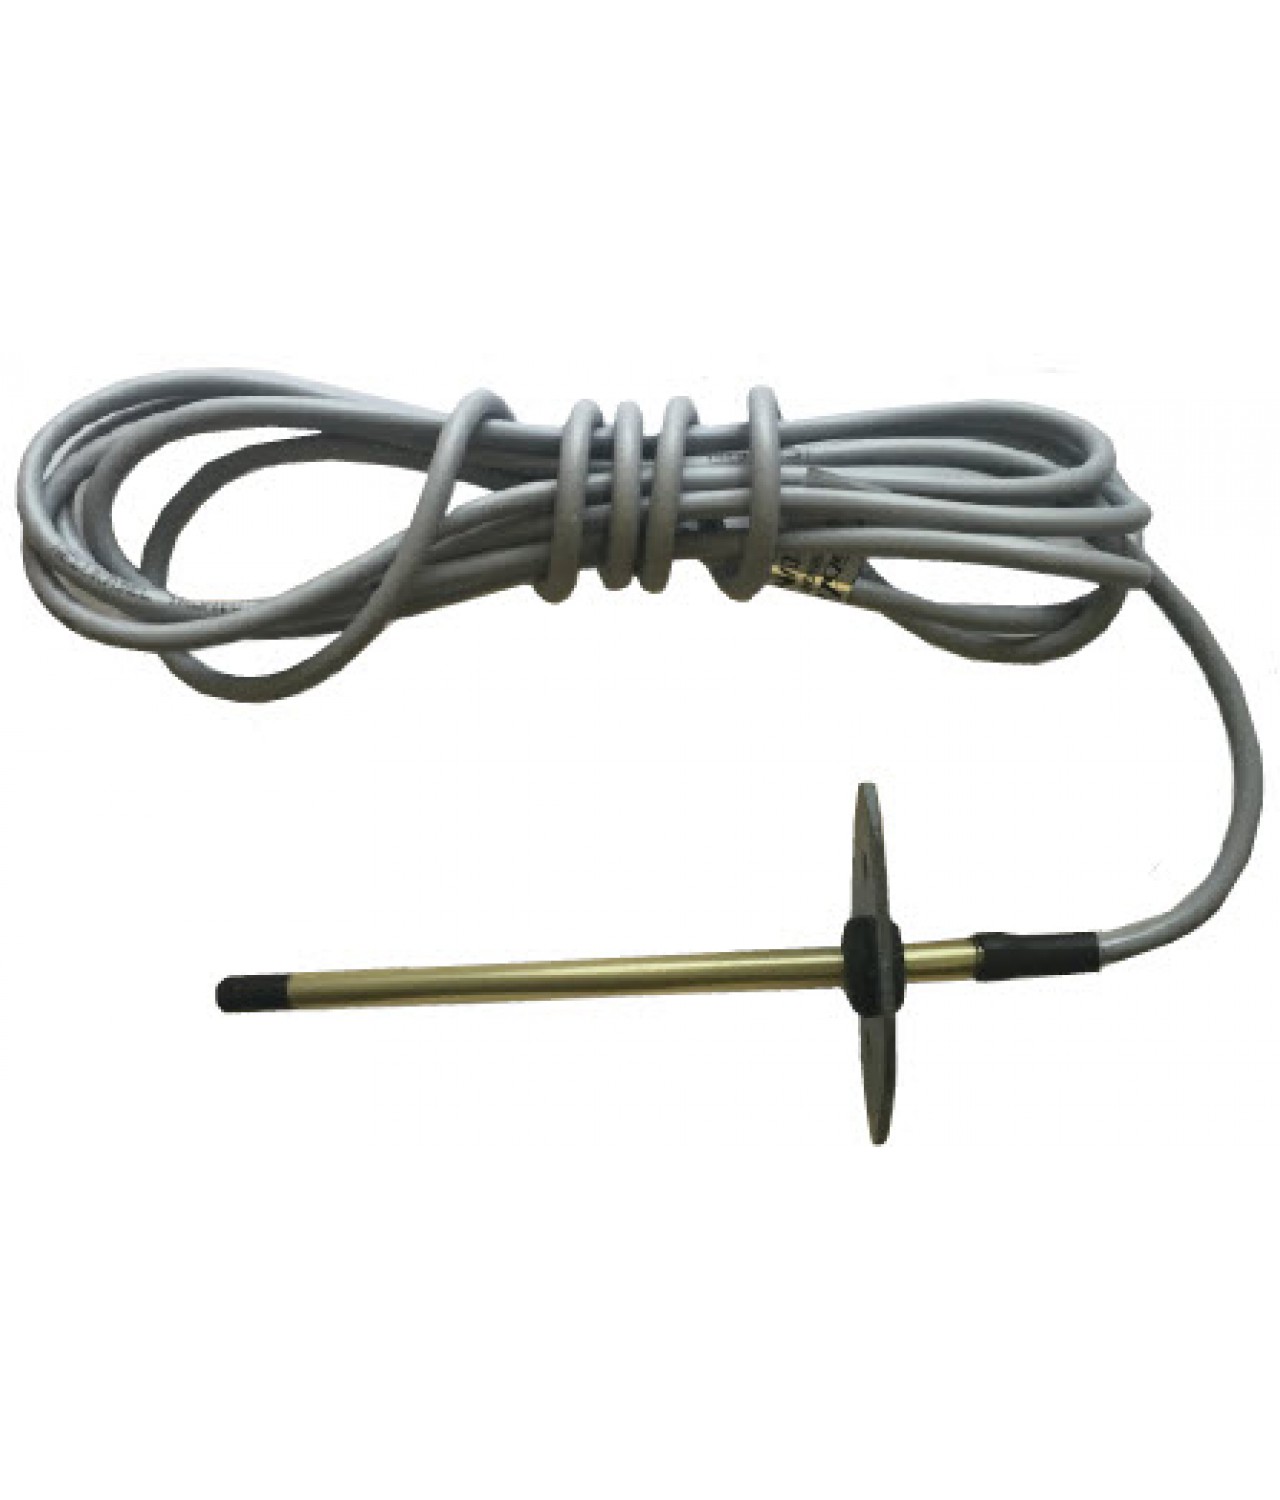 Duct thermosensor TSD/NTC10K/2 with 2 m cable included when ordering EHC SE (0...+30)